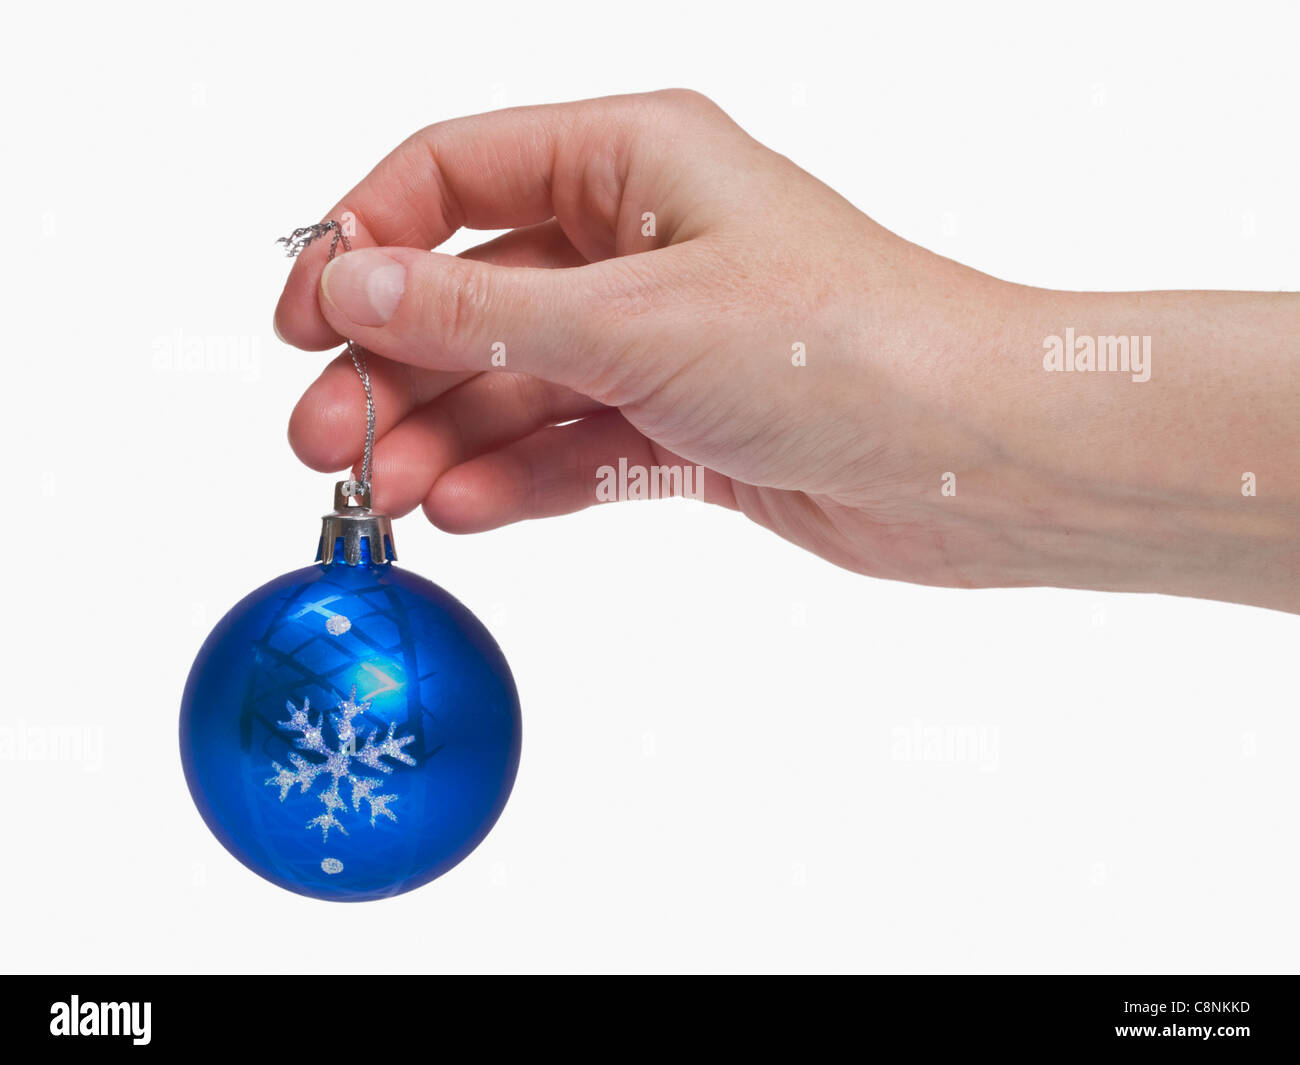 a christmas ball is hand-held Stock Photo